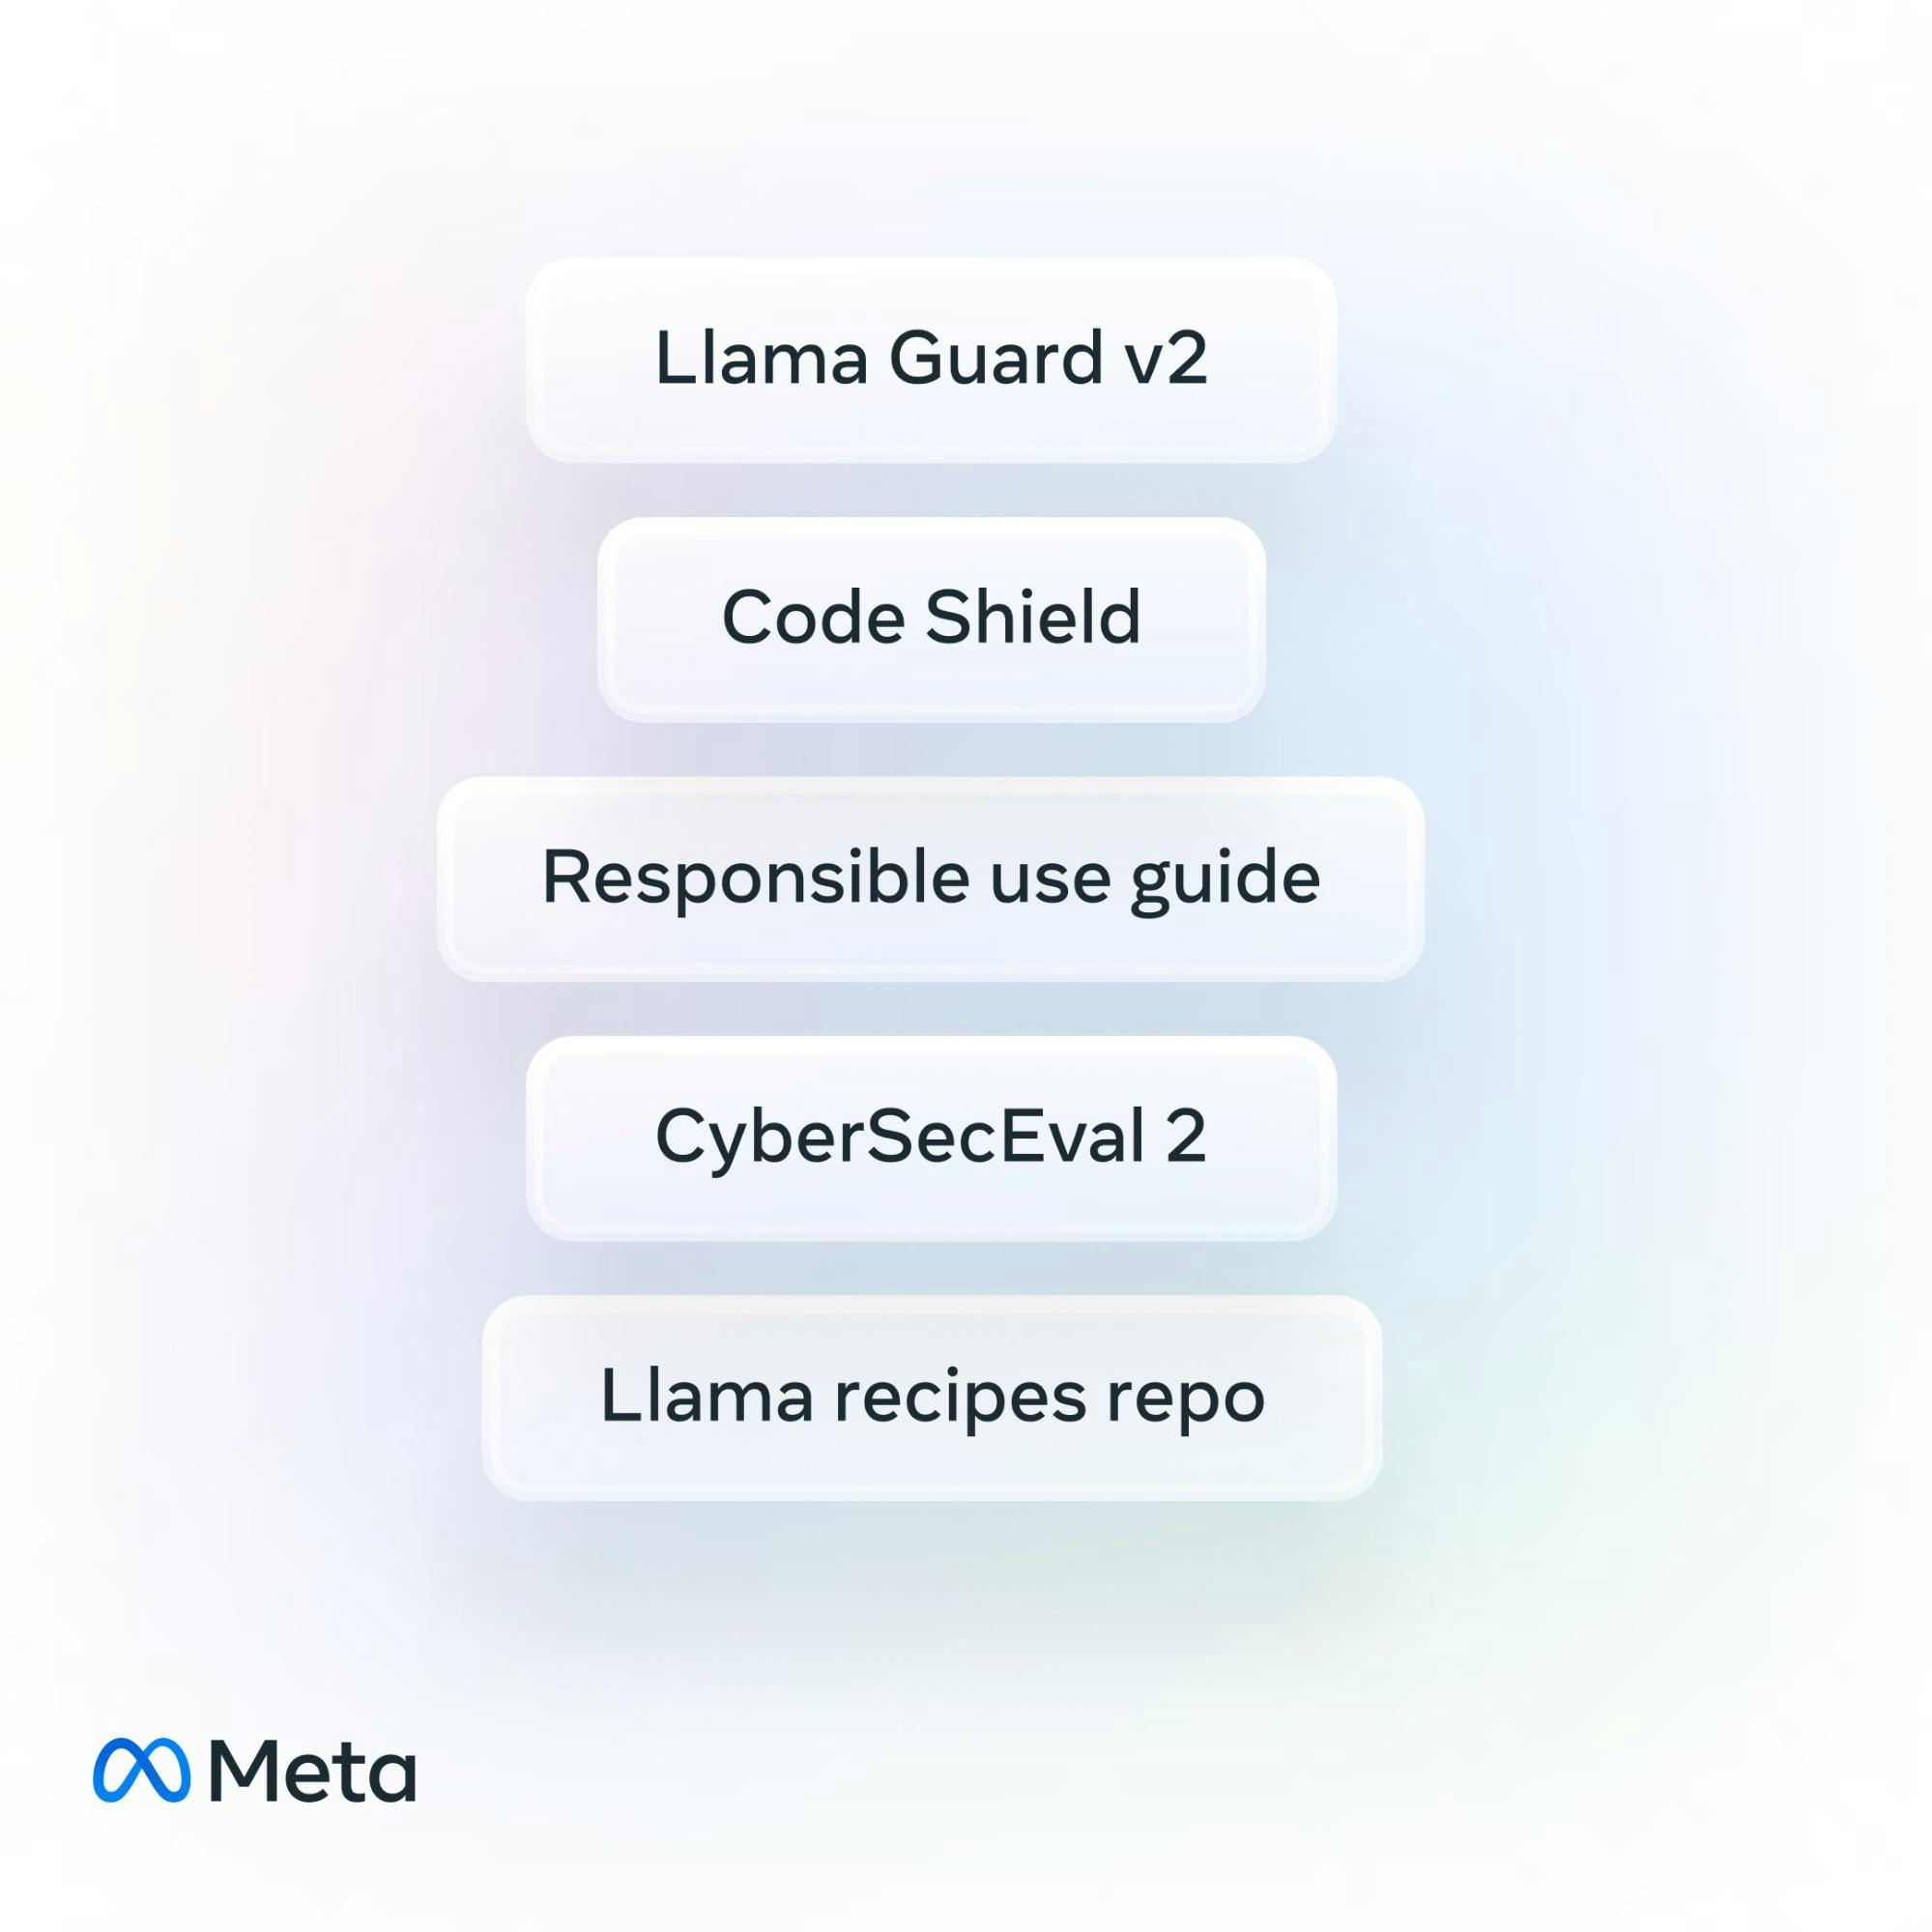 Llama 3 Trust and Safety Tools